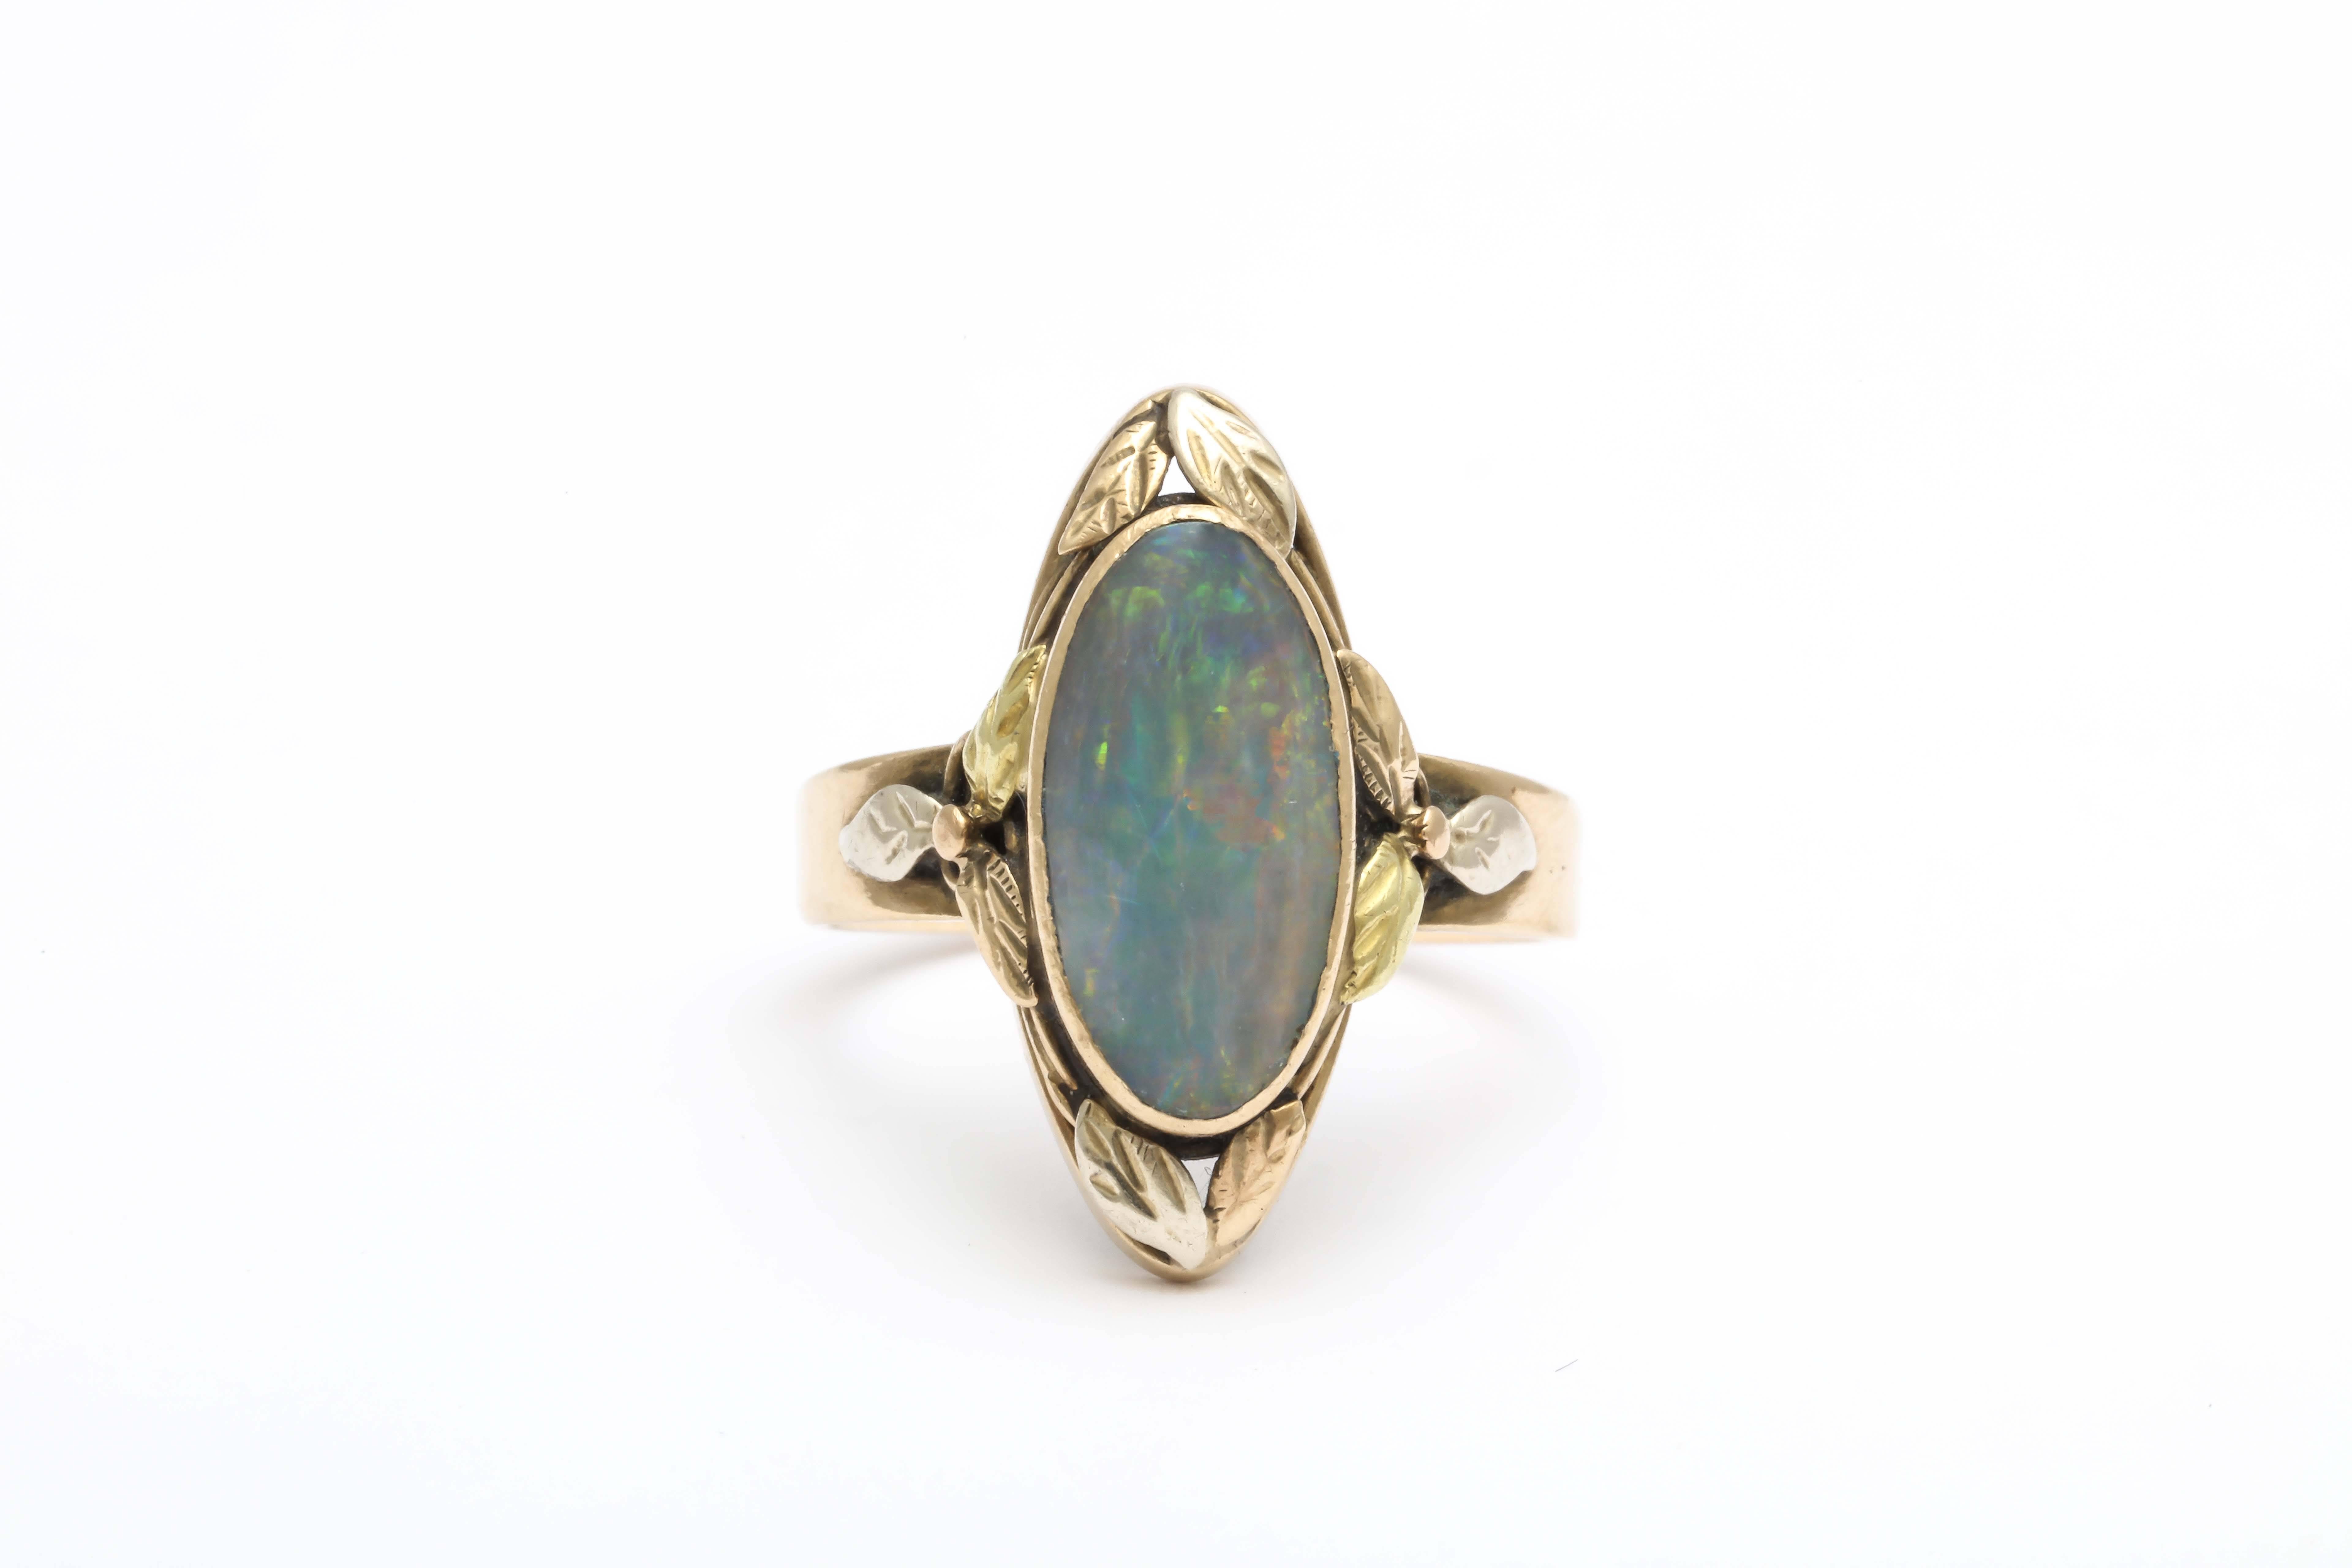 A 10K American made Arts & Crafts ring. An oval opal is set surrounded by leaves of white, yellow, and pink gold. This anti-industrial movement was meant to take artists back to their roots. Forms were simple and the idea of the handmade in both